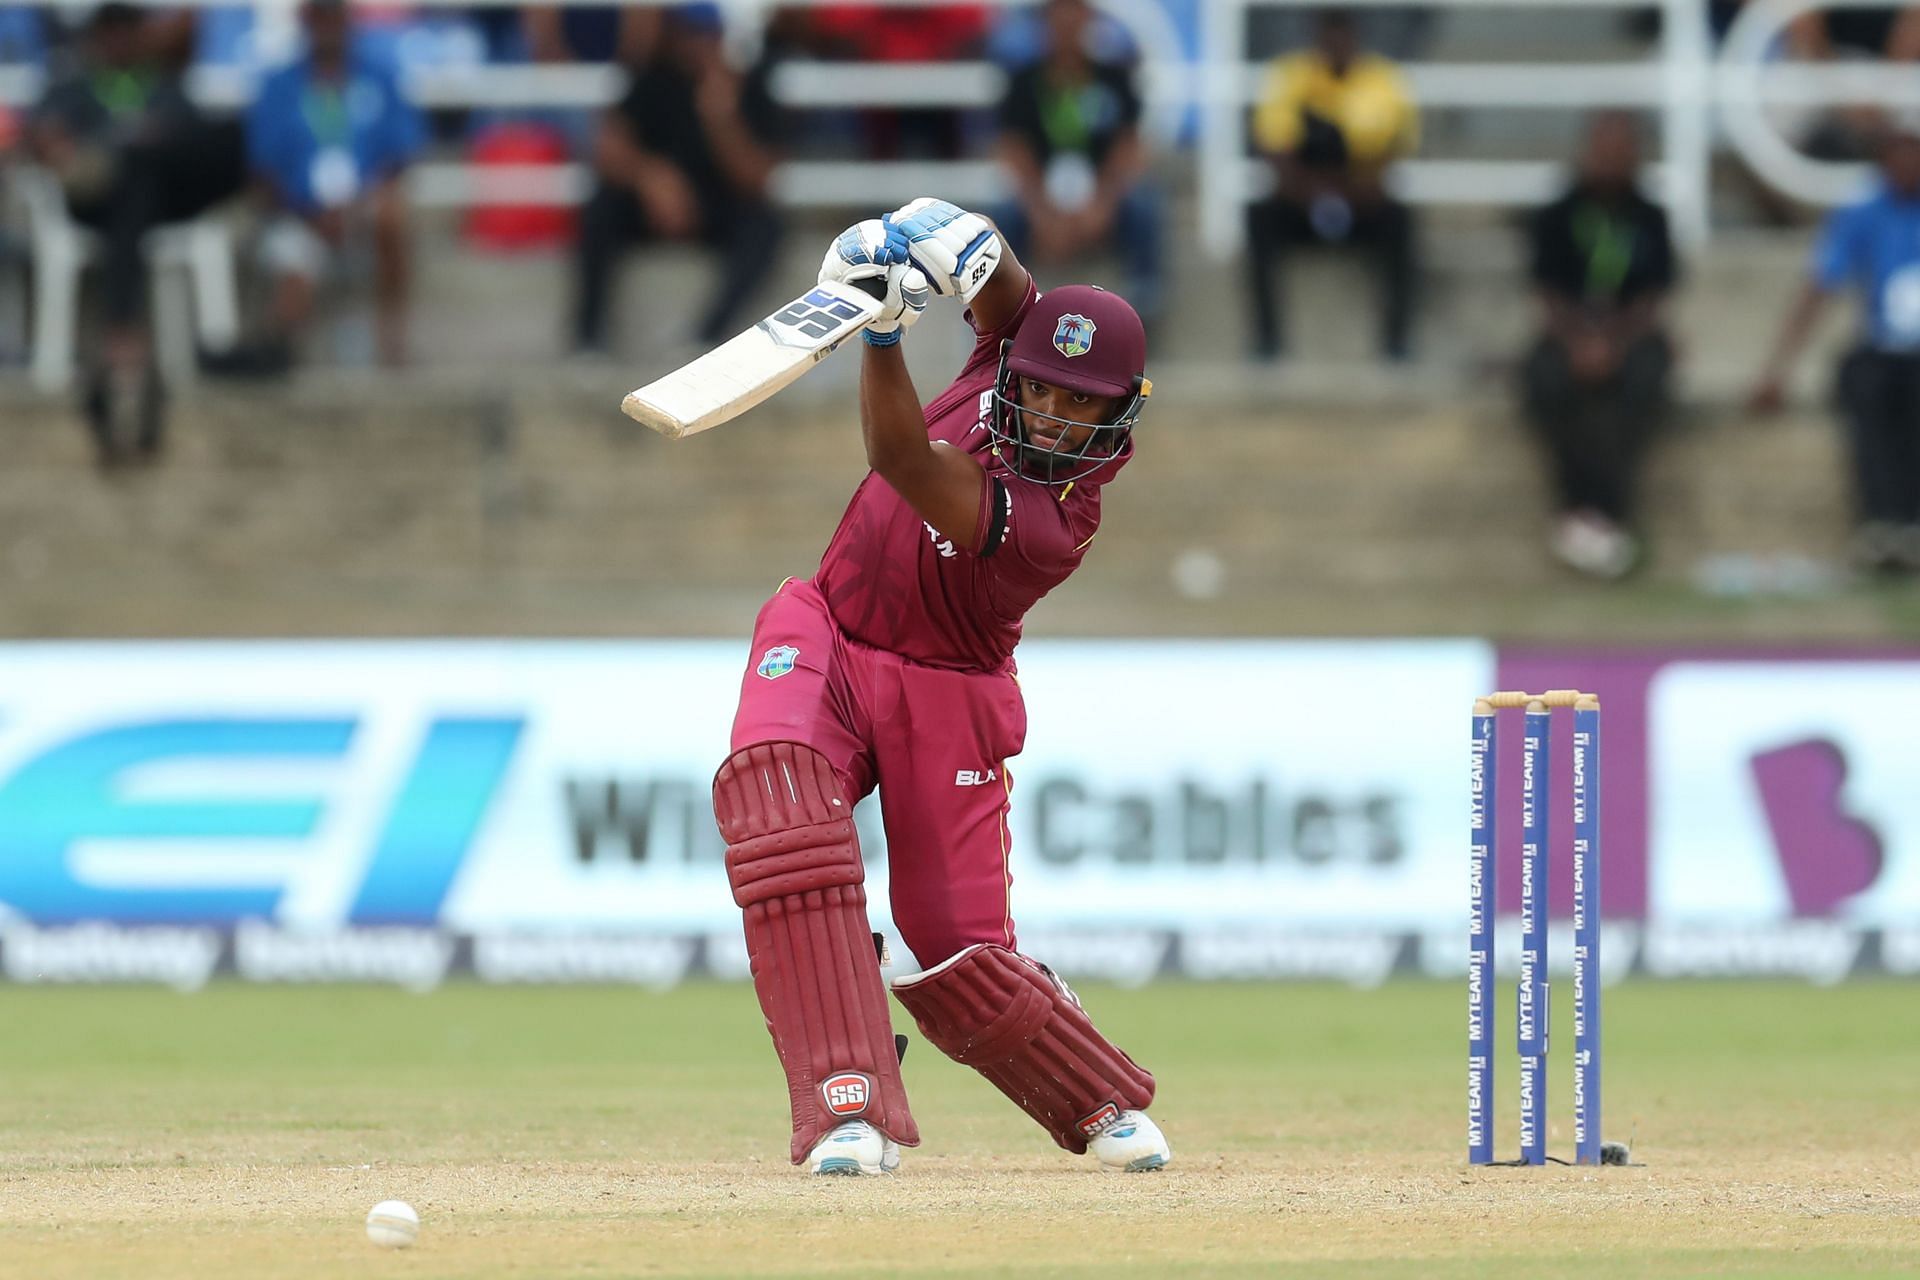 3 reasons why West Indies may not qualify for 2023 World Cup